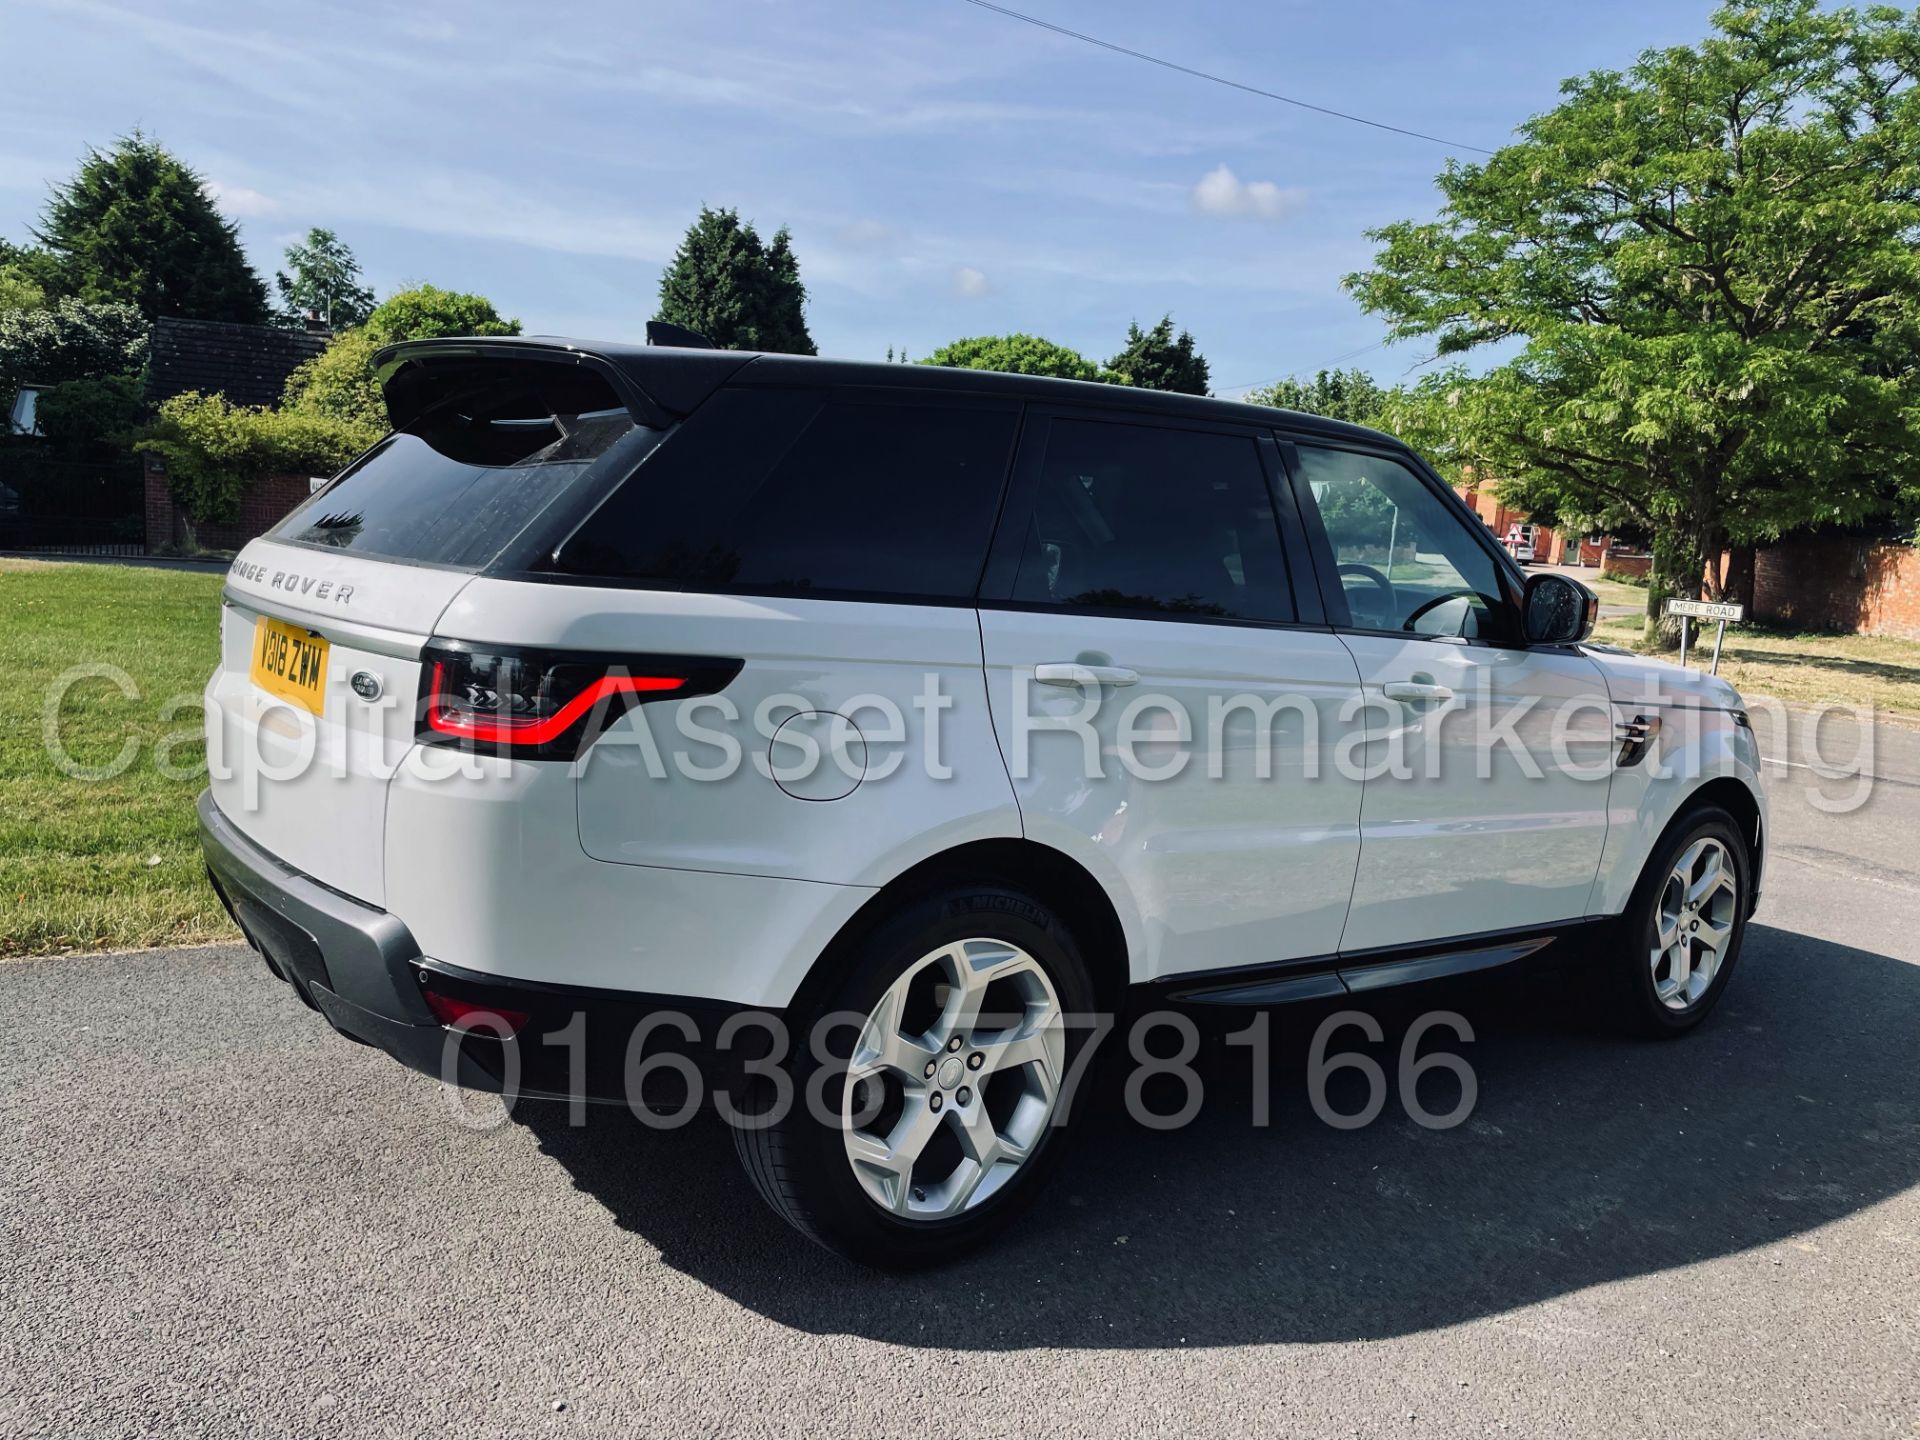 (On Sale) RANGE ROVER SPORT *HSE EDITION* SUV (2018 - NEW MODEL) '8 SPEED AUTO - LEATHER - NAV' - Image 13 of 58